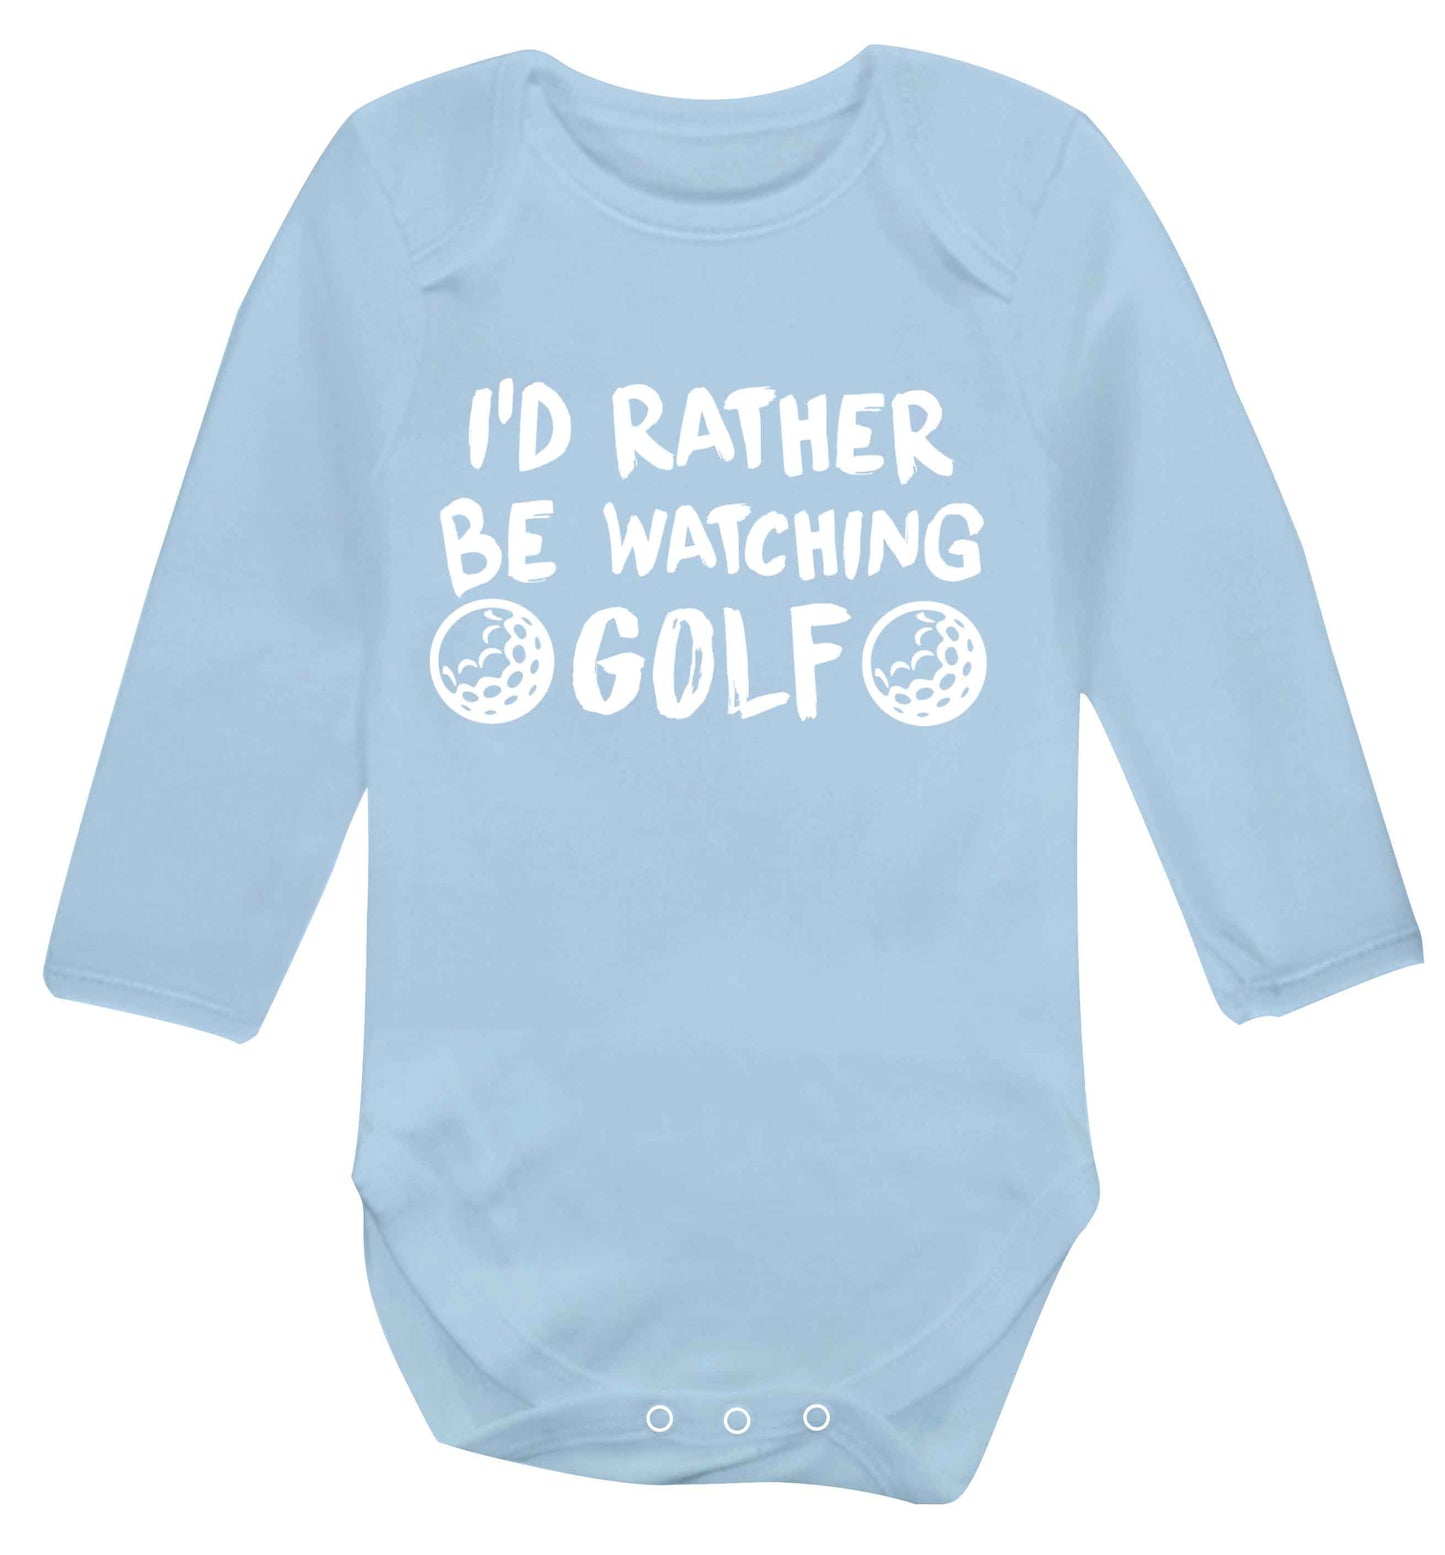 I'd rather be watching golf Baby Vest long sleeved pale blue 6-12 months